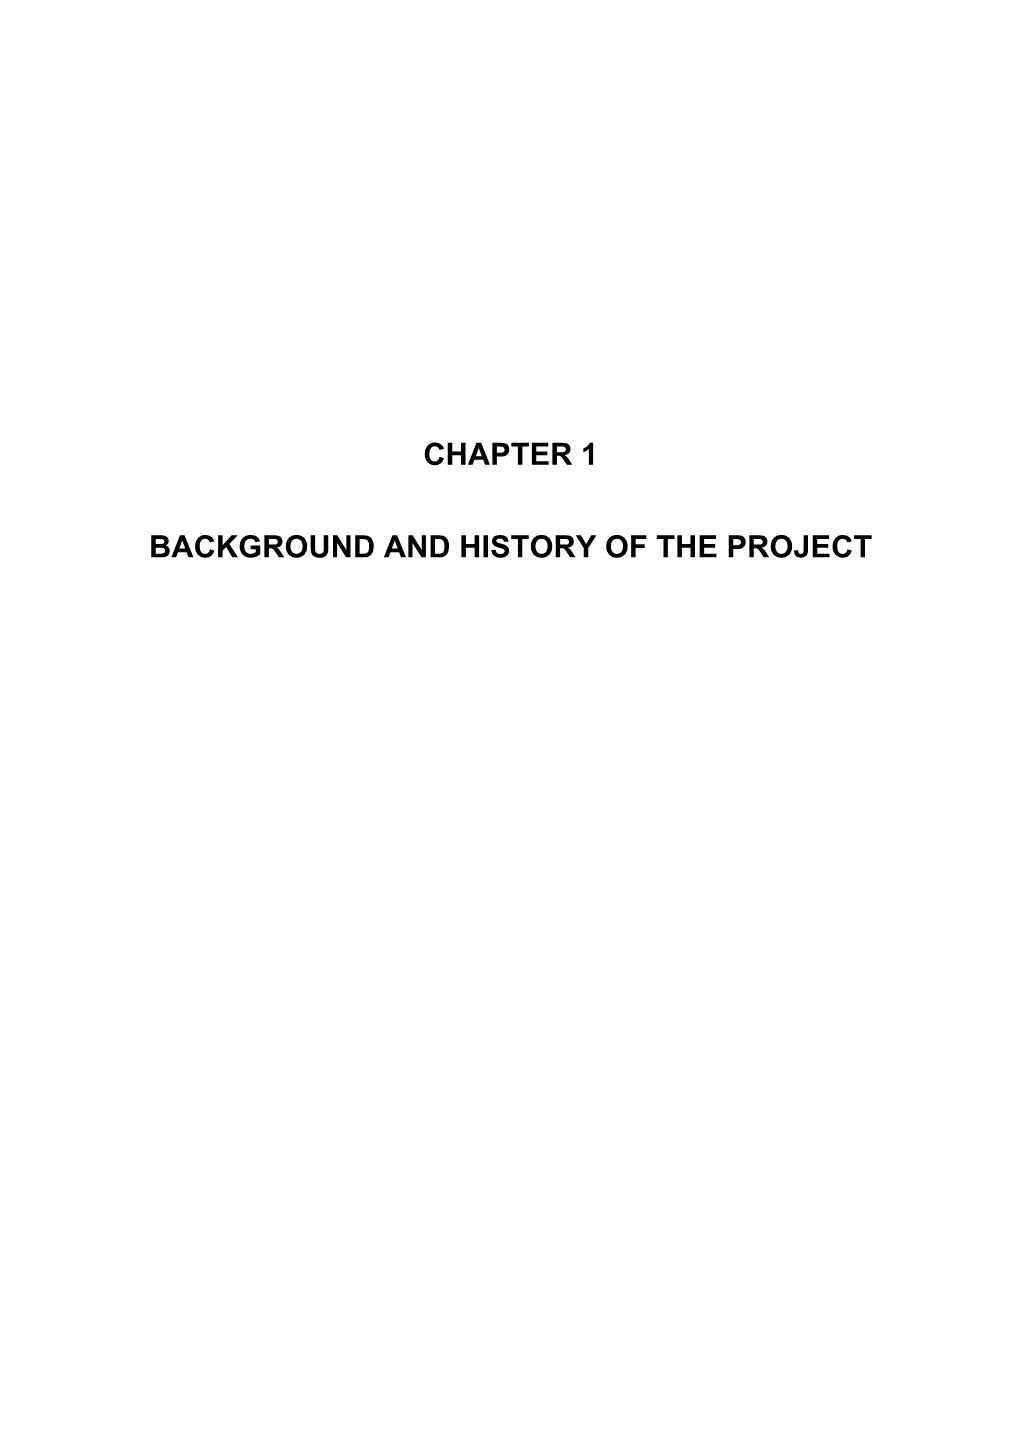 Chapter 1 Background and History of the Project